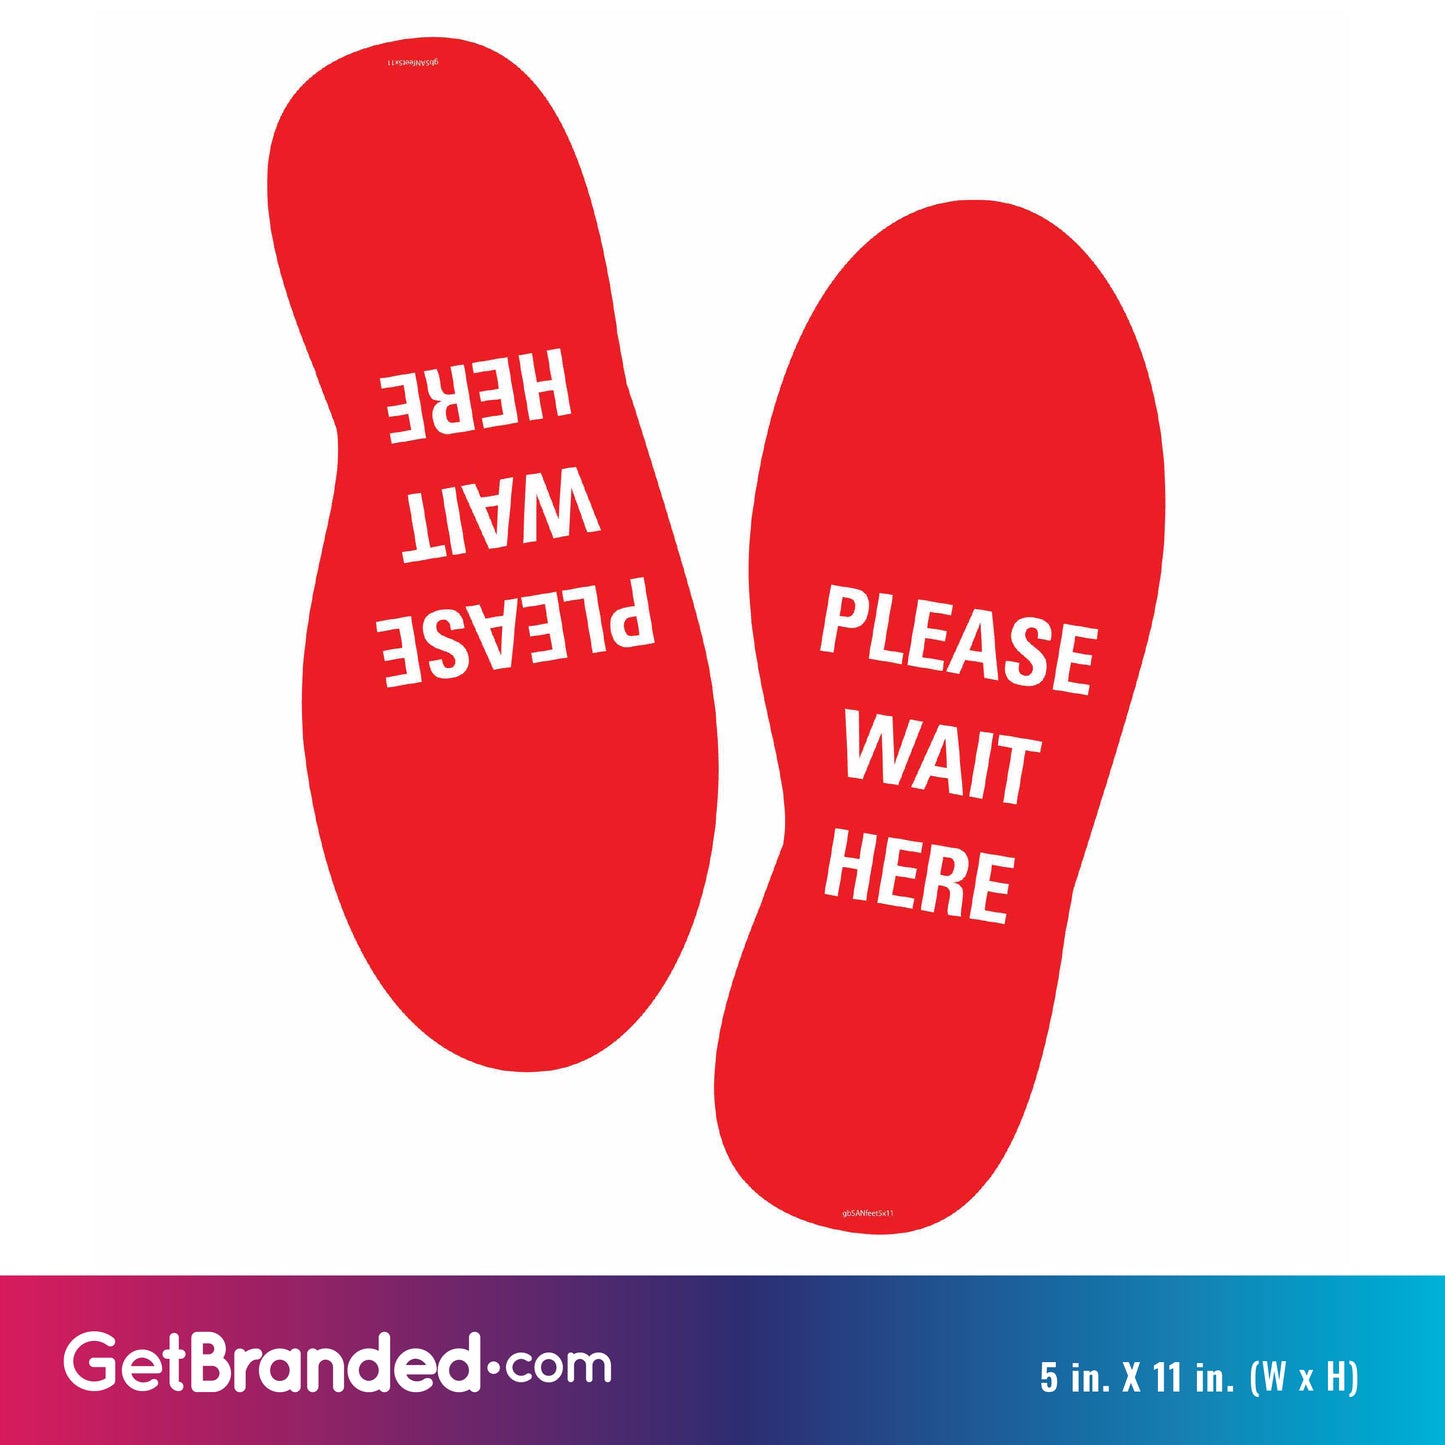 Social Distance Stand Here Feet Decal size guide.